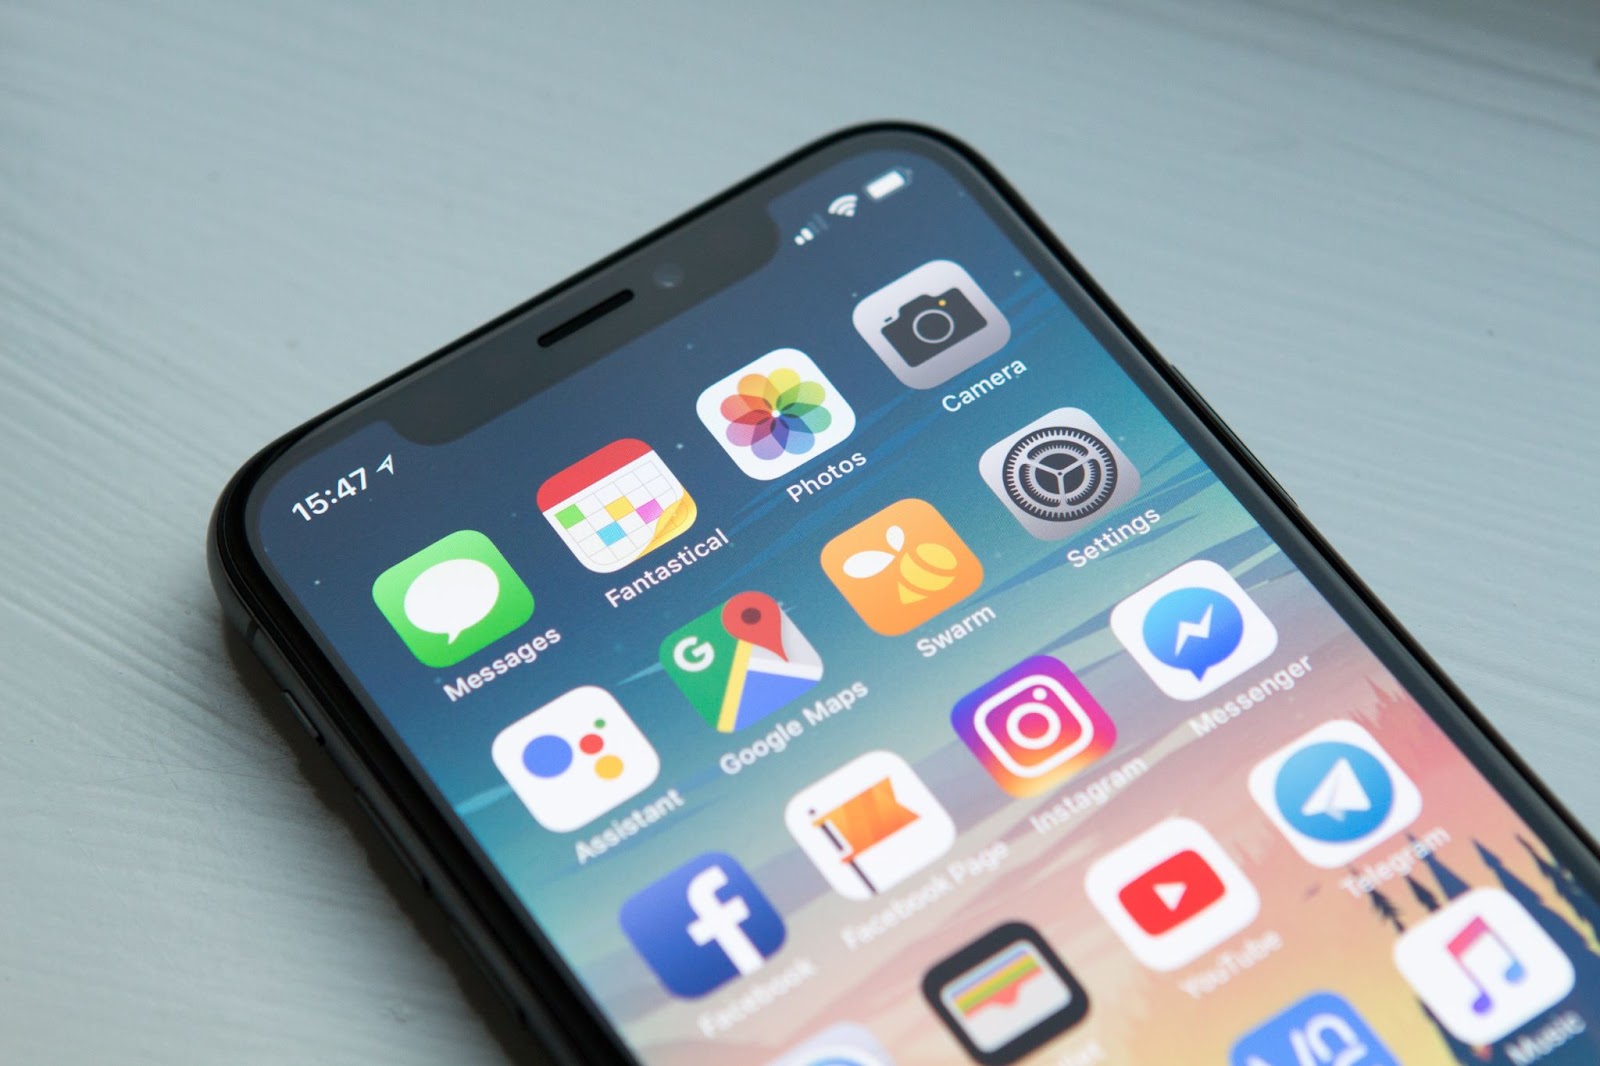 Looking for a phone number tracker free tool? Let us show you how to use built-in and third-party apps secretly. Best solutions for iOS and Android users.